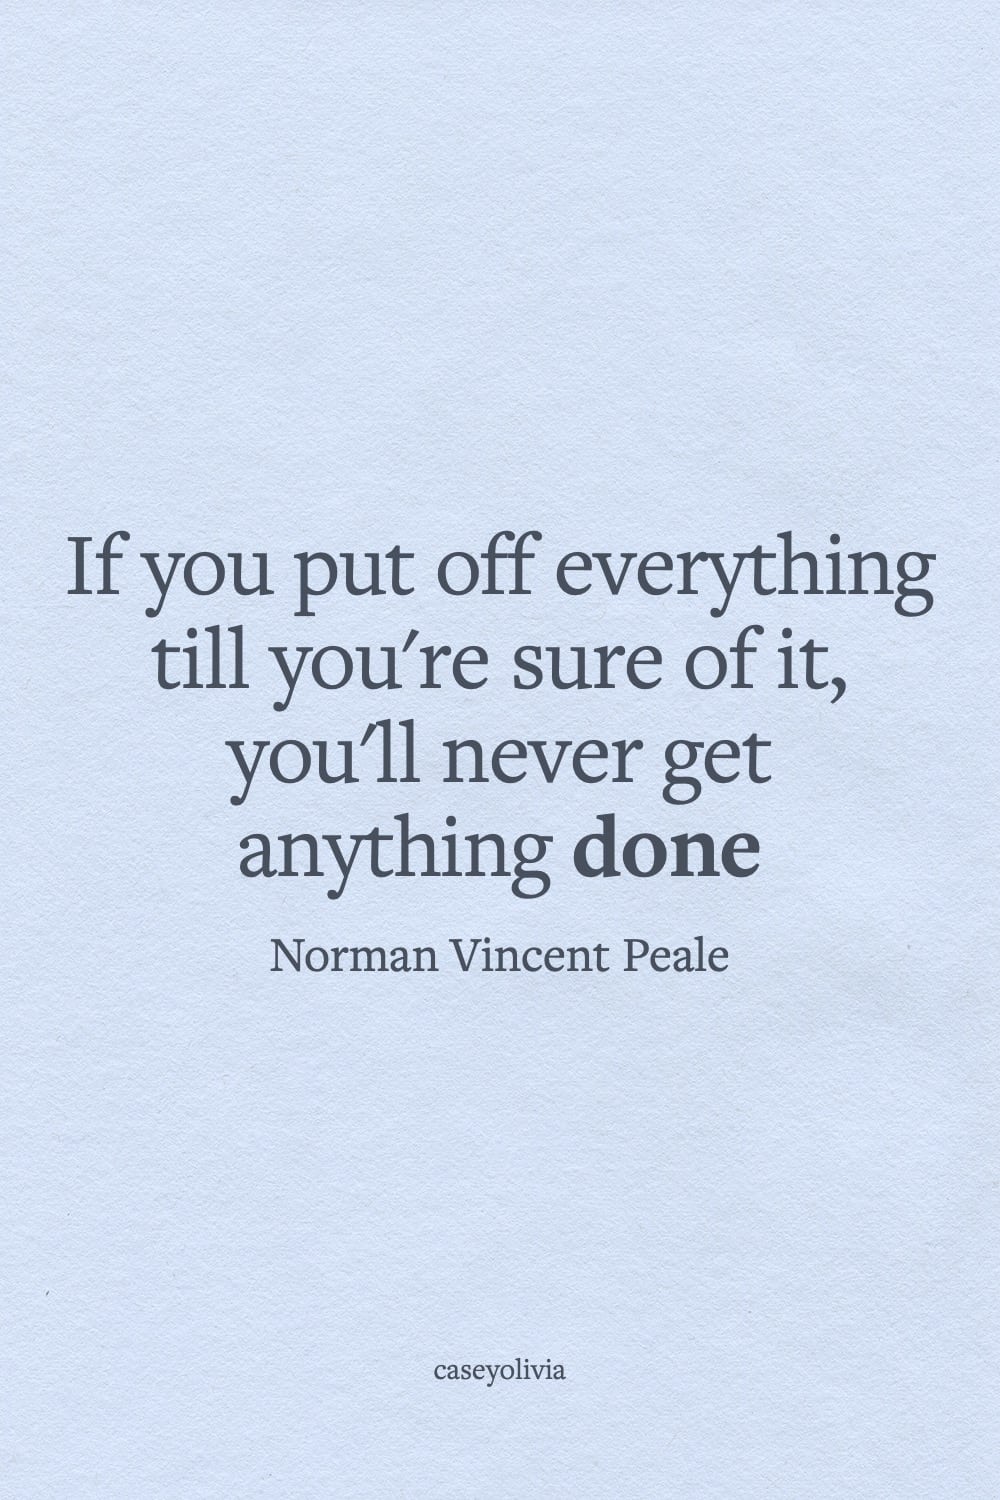 norman vincent peale dont put off everything quote